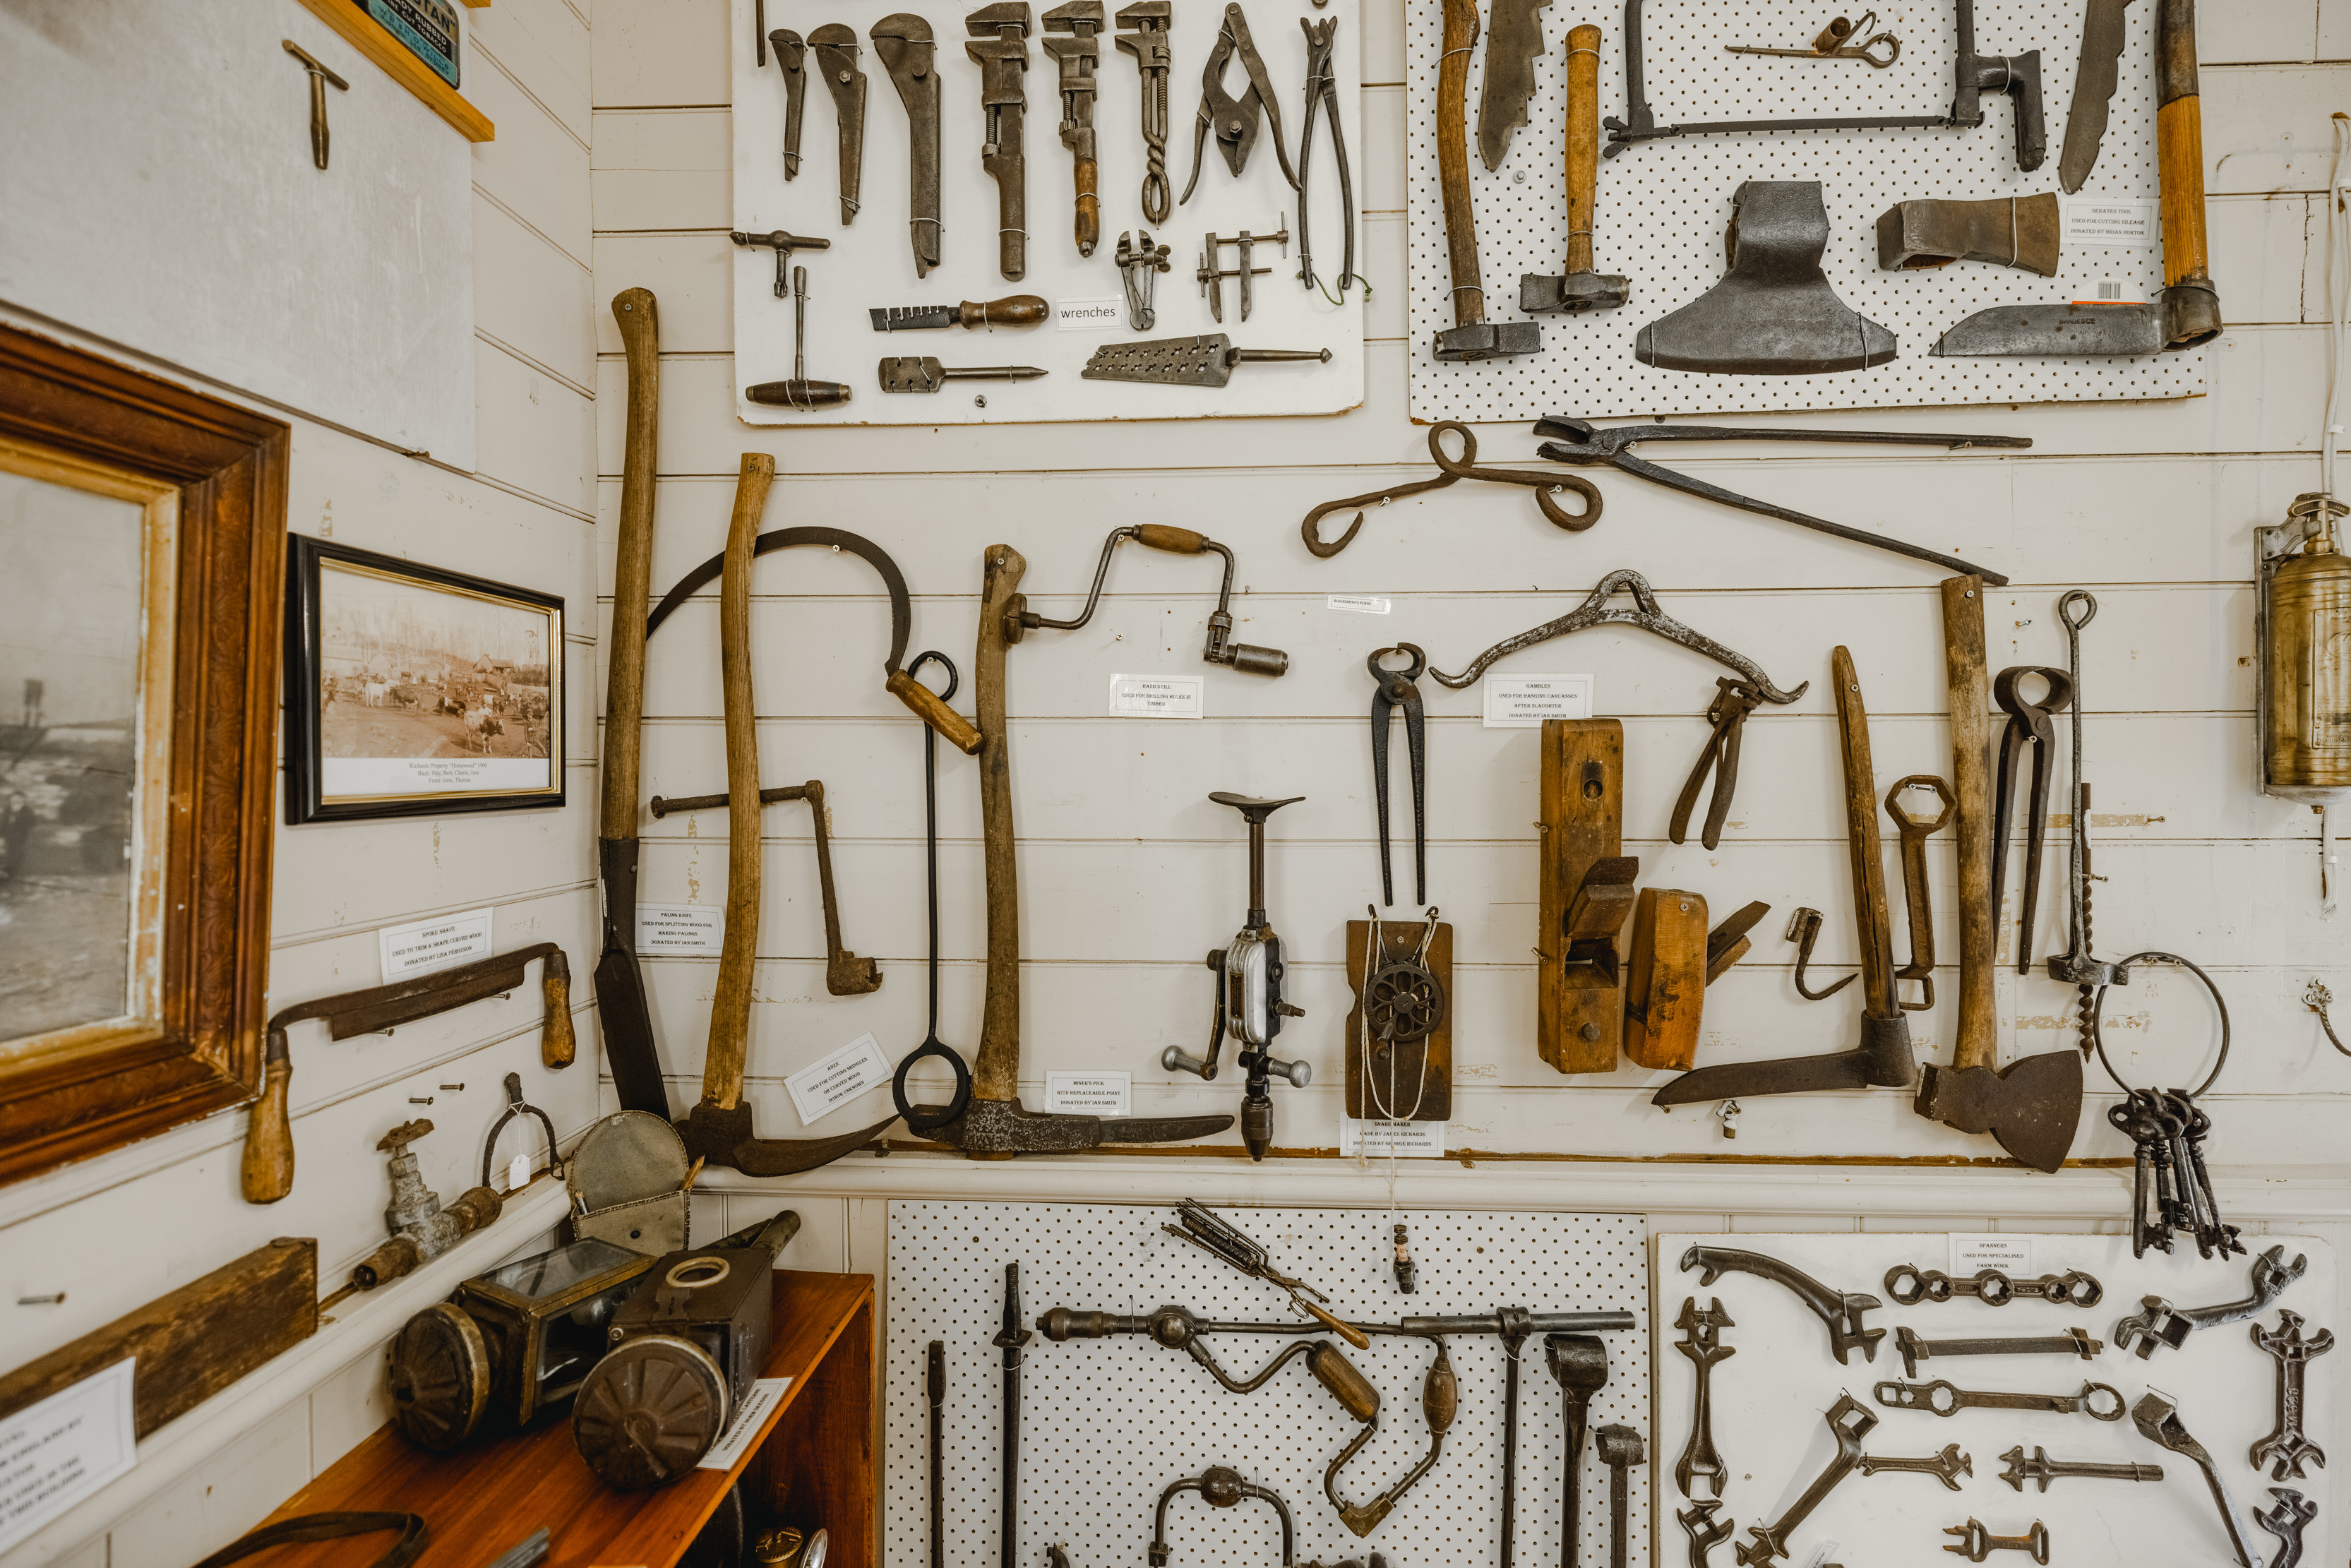 Image within the Wilmost Museum. Antique tools fill the wall.